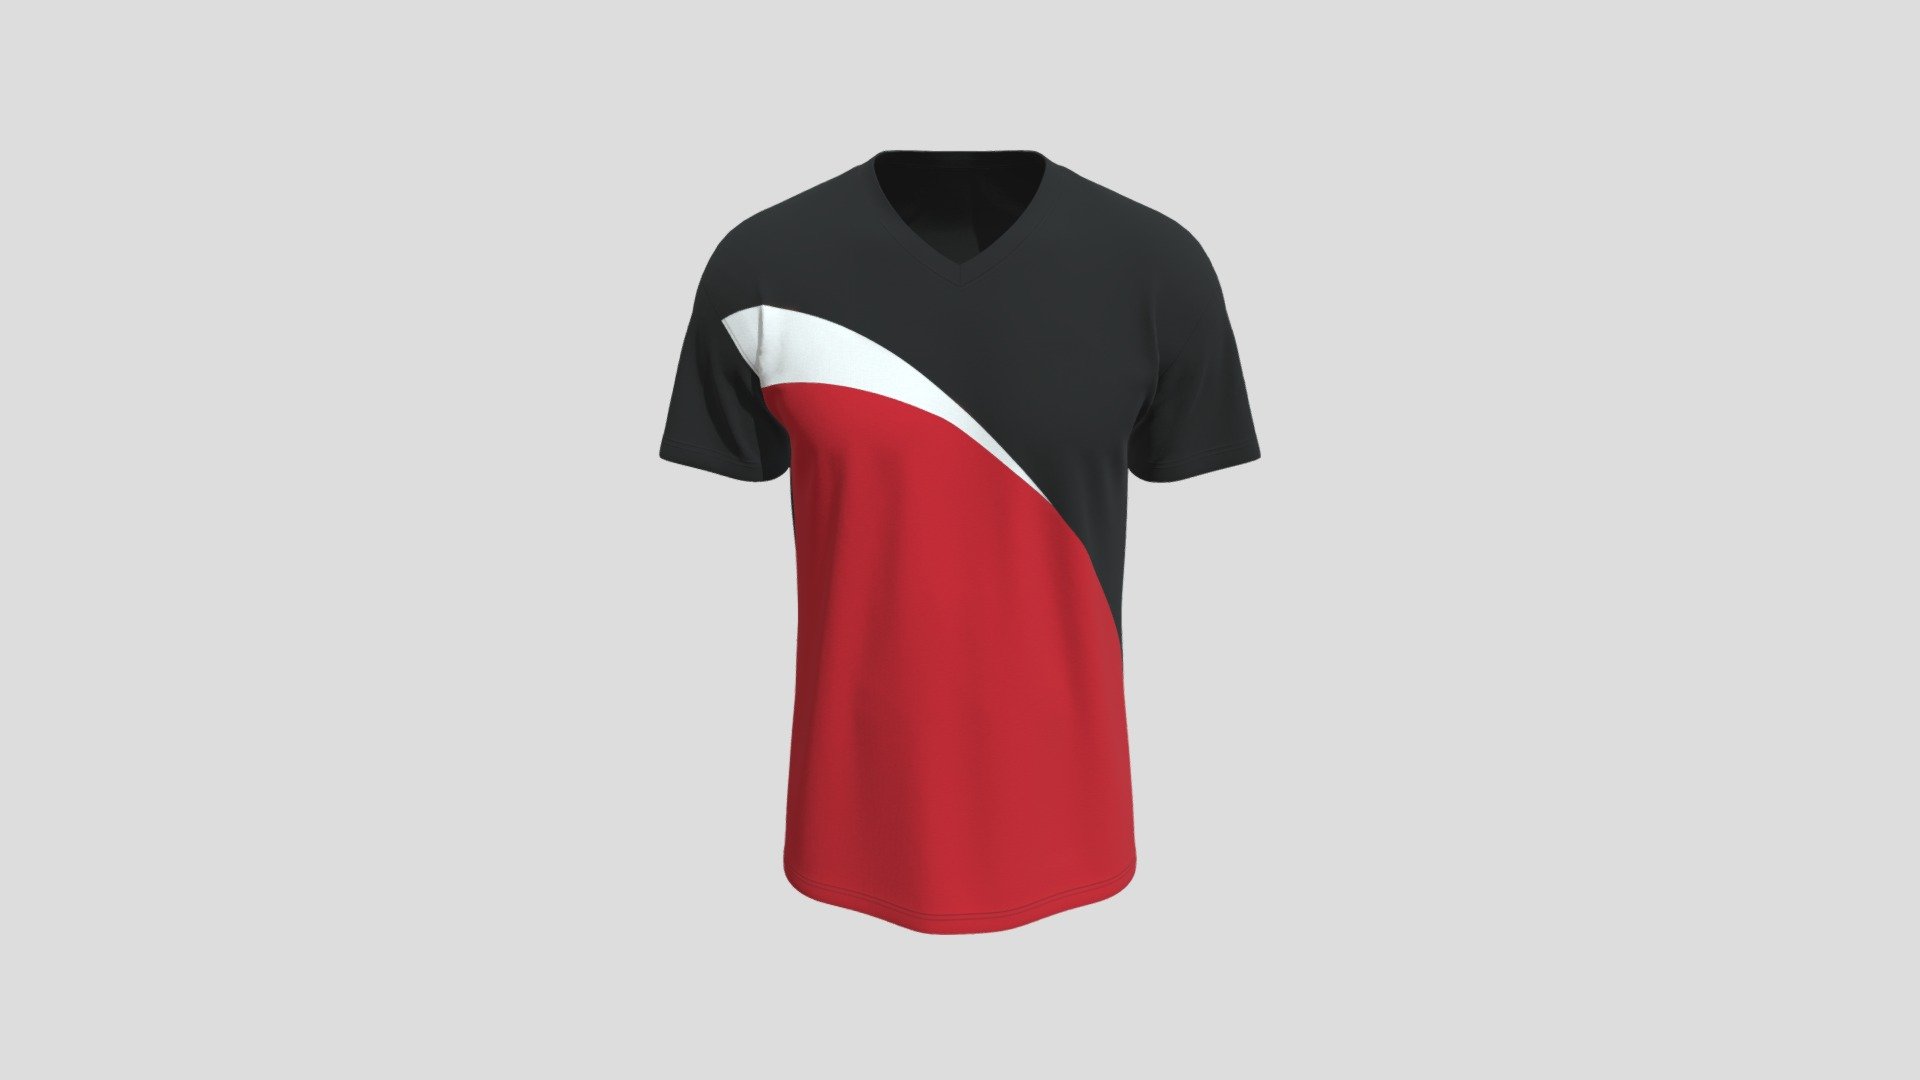 Cloth Title = Sporty V-neck t-shirt 

SKU = DG100105 

Category = Unisex 

Product Type = T-Shirt 

Cloth Length = Regular 

Body Fit = Regular Fit 

Occasion = Casual  

Sleeve Style = Set In Sleeve 


Our Services:

3D Apparel Design.

OBJ,FBX,GLTF Making with High/Low Poly.

Fabric Digitalization.

Mockup making.

3D Teck Pack.

Pattern Making.

2D Illustration.

Cloth Animation and 360 Spin Video.


Contact us:- 

Email: info@digitalfashionwear.com 

Website: https://digitalfashionwear.com 

WhatsApp No: +8801759350445 


We designed all the types of cloth specially focused on product visualization, e-commerce, fitting, and production. 

We will design: 

T-shirts 

Polo shirts 

Hoodies 

Sweatshirt 

Jackets 

Shirts 

TankTops 

Trousers 

Bras 

Underwear 

Blazer 

Aprons 

Leggings 

and All Fashion items. 





Our goal is to make sure what we provide you, meets your demand 3d model